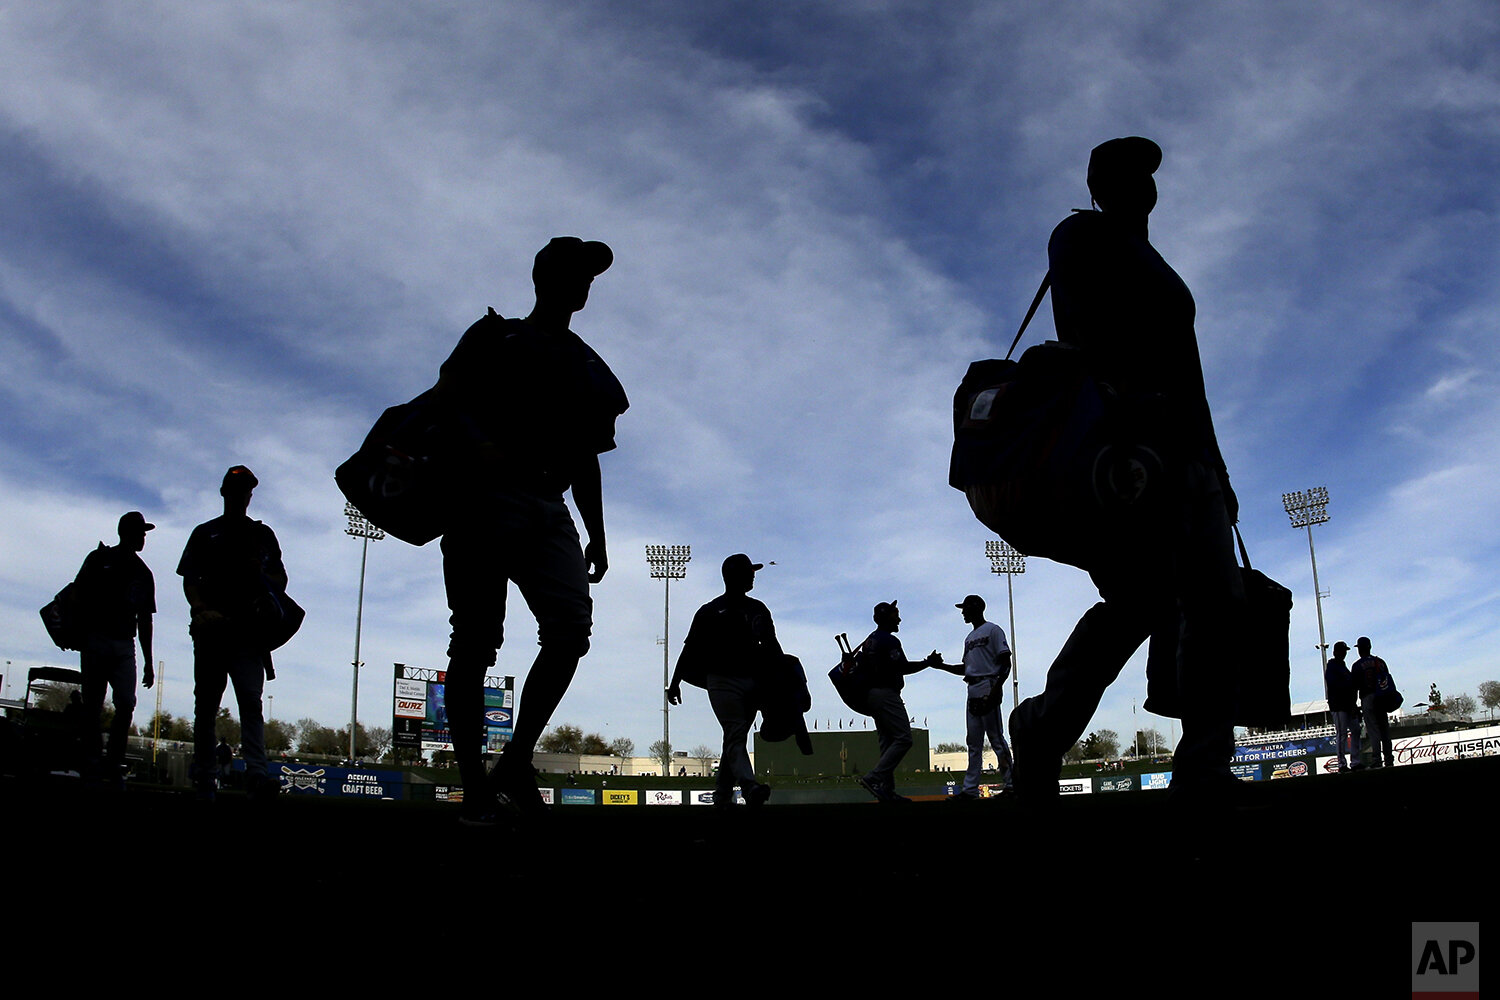  Chicago Cubs players walk to the clubhouse after a spring training baseball game against the Texas Rangers Thursday, Feb. 27, 2020, in Surprise, Ariz. The Rangers won 13-1. (AP Photo/Charlie Riedel) 